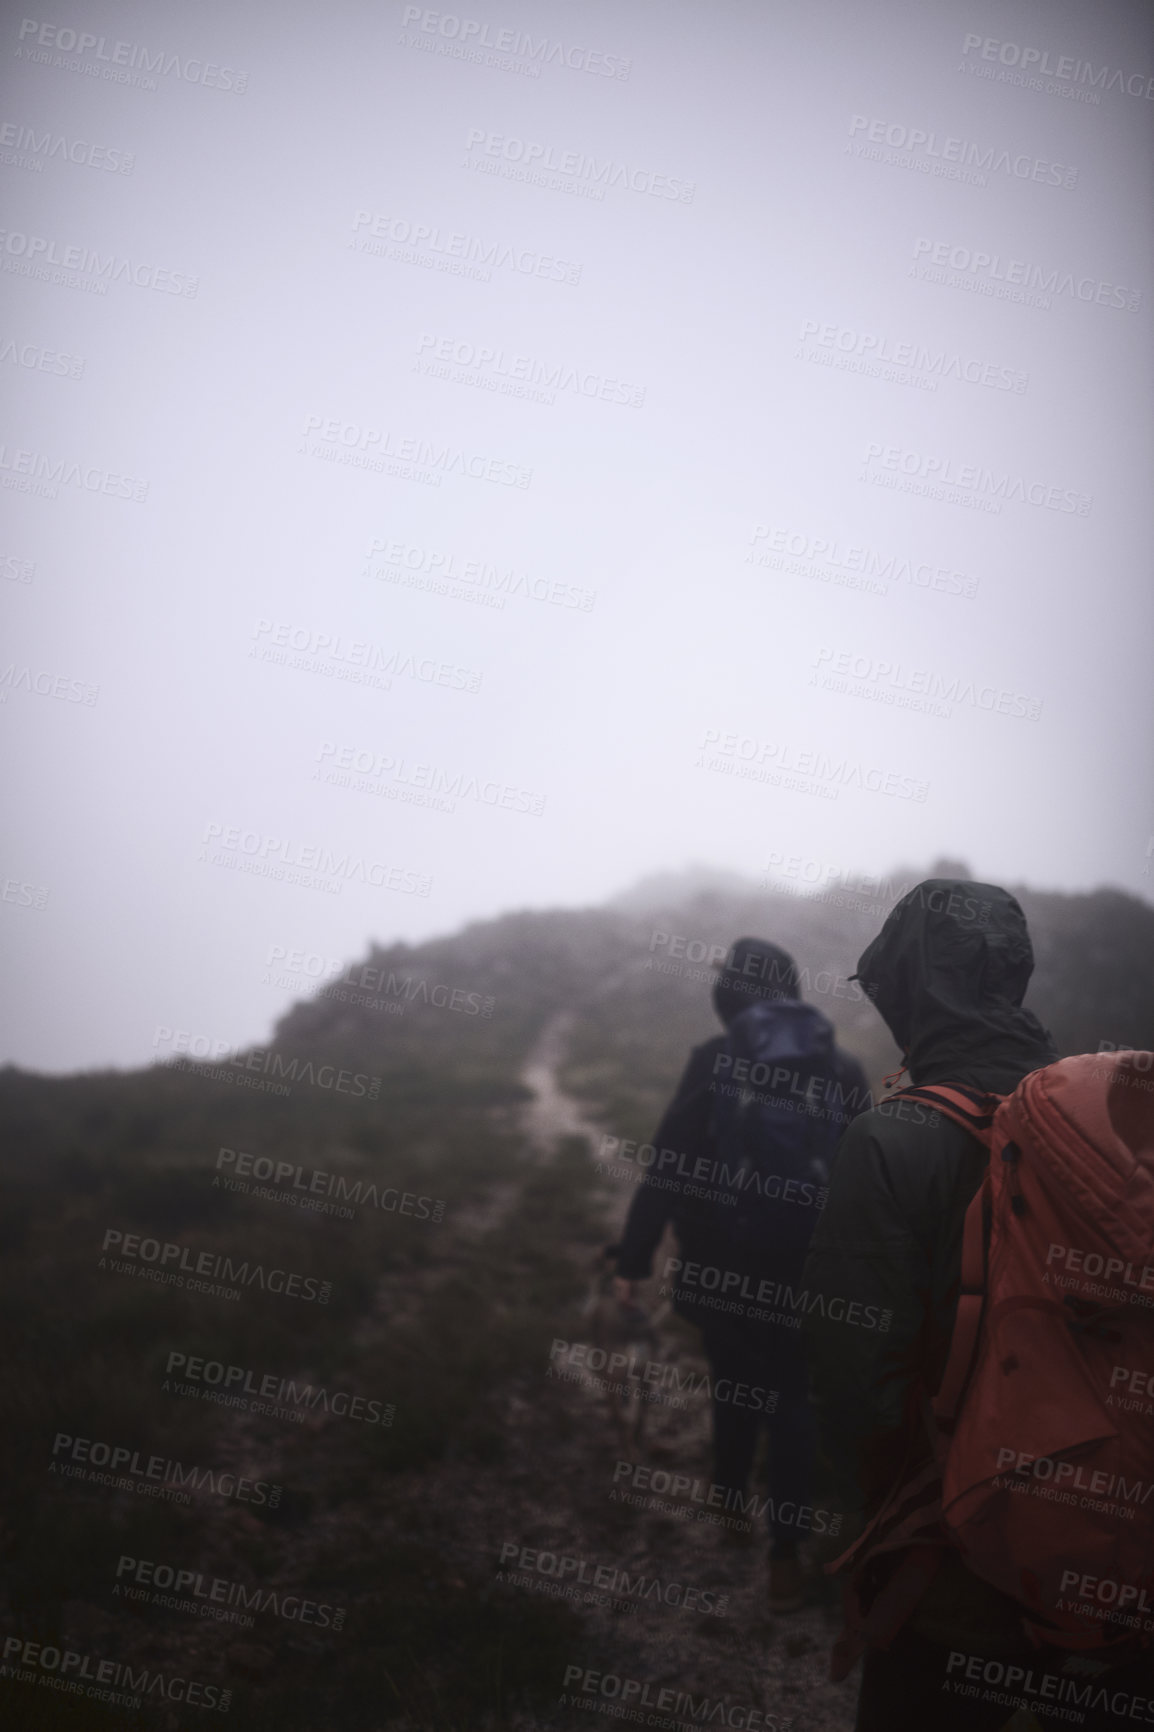 Buy stock photo Shot of two male friends out hiking in the mountains on a foggy day